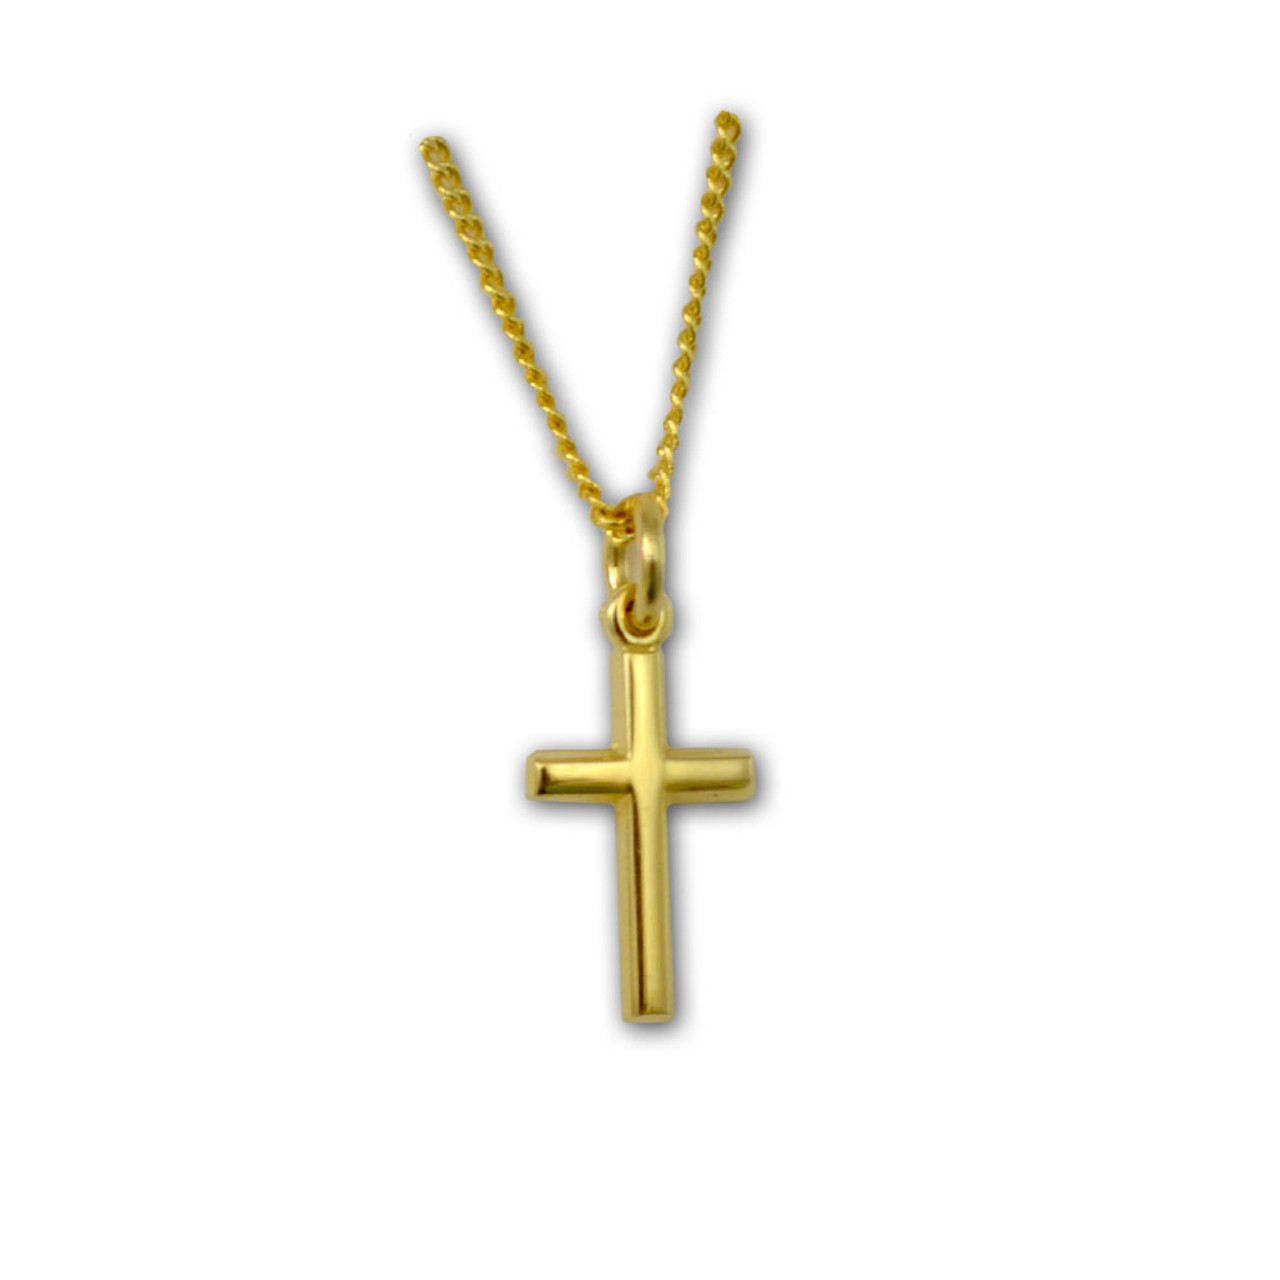 Gold plated cross necklace | River Island